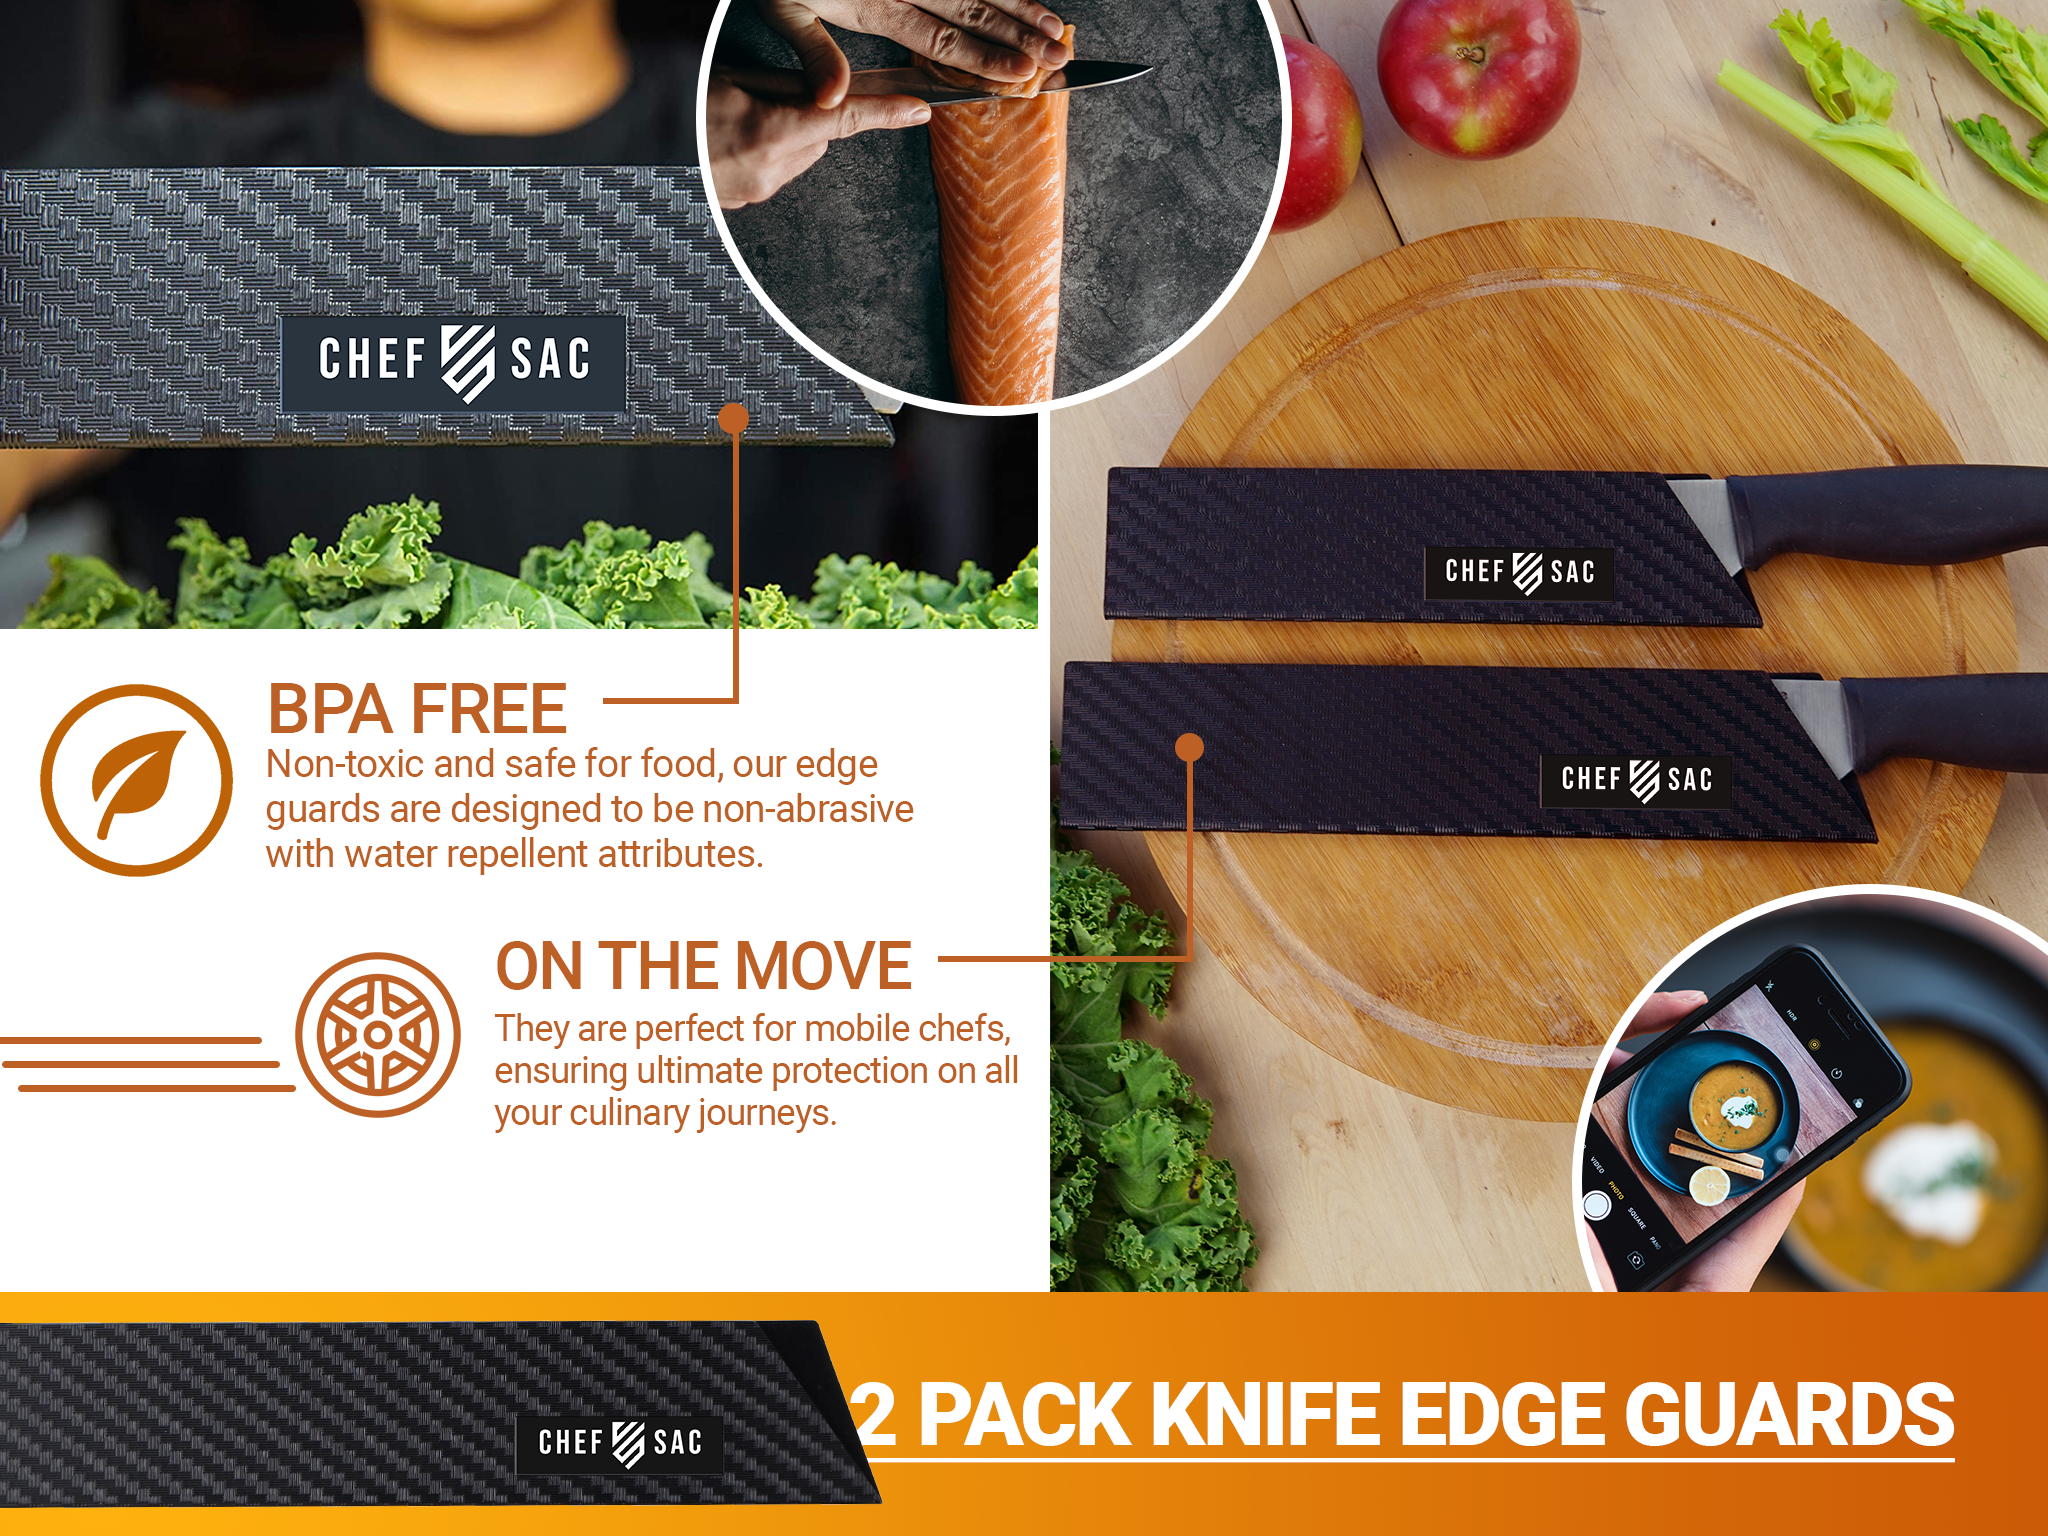 EVERPRIDE 8 inch Chef Knife Sheath Set (2-Piece Set) Universal Blade Edge Cover Guards for Chef and Kitchen Knives – Durable, BPA-Free, Felt Lined, St